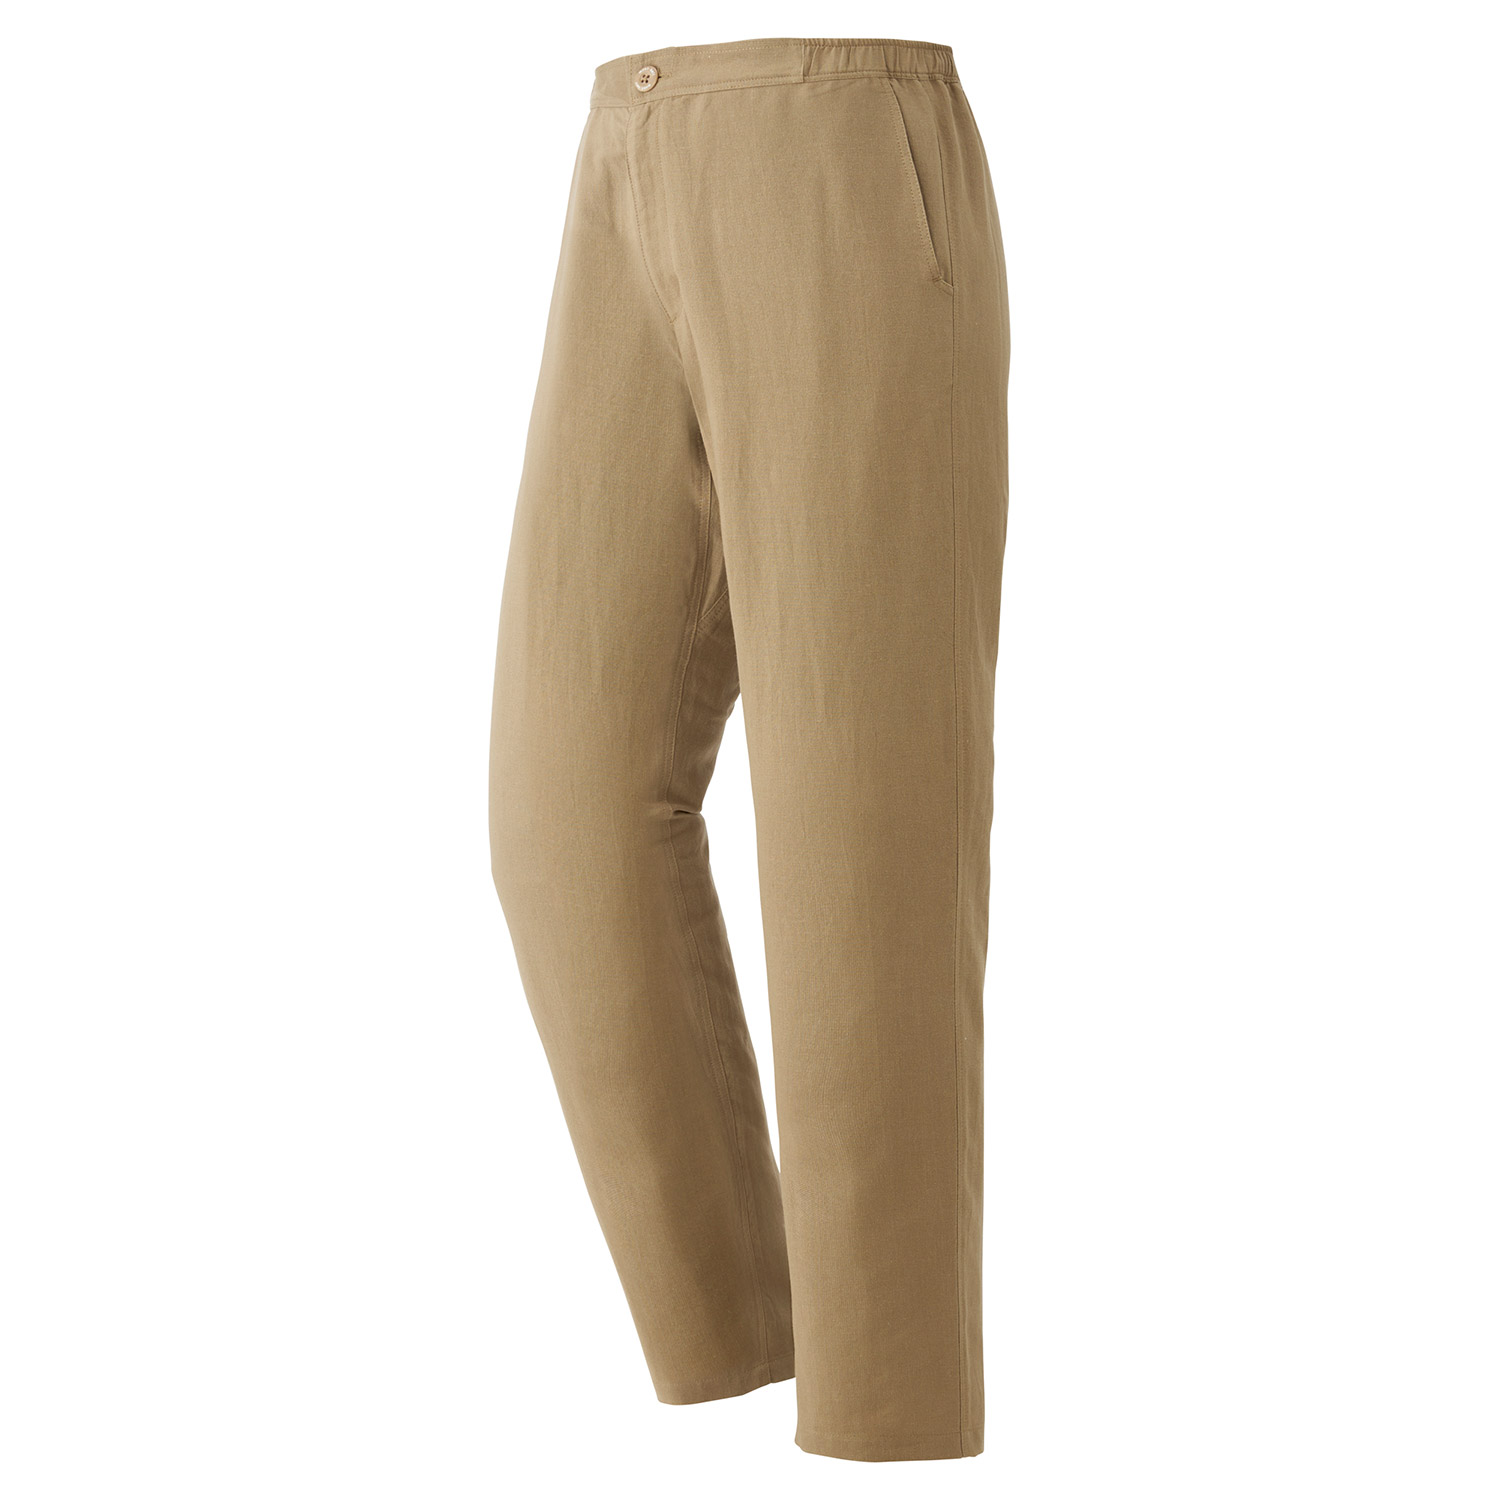 KAMICO Pants Men's | Montbell Euro